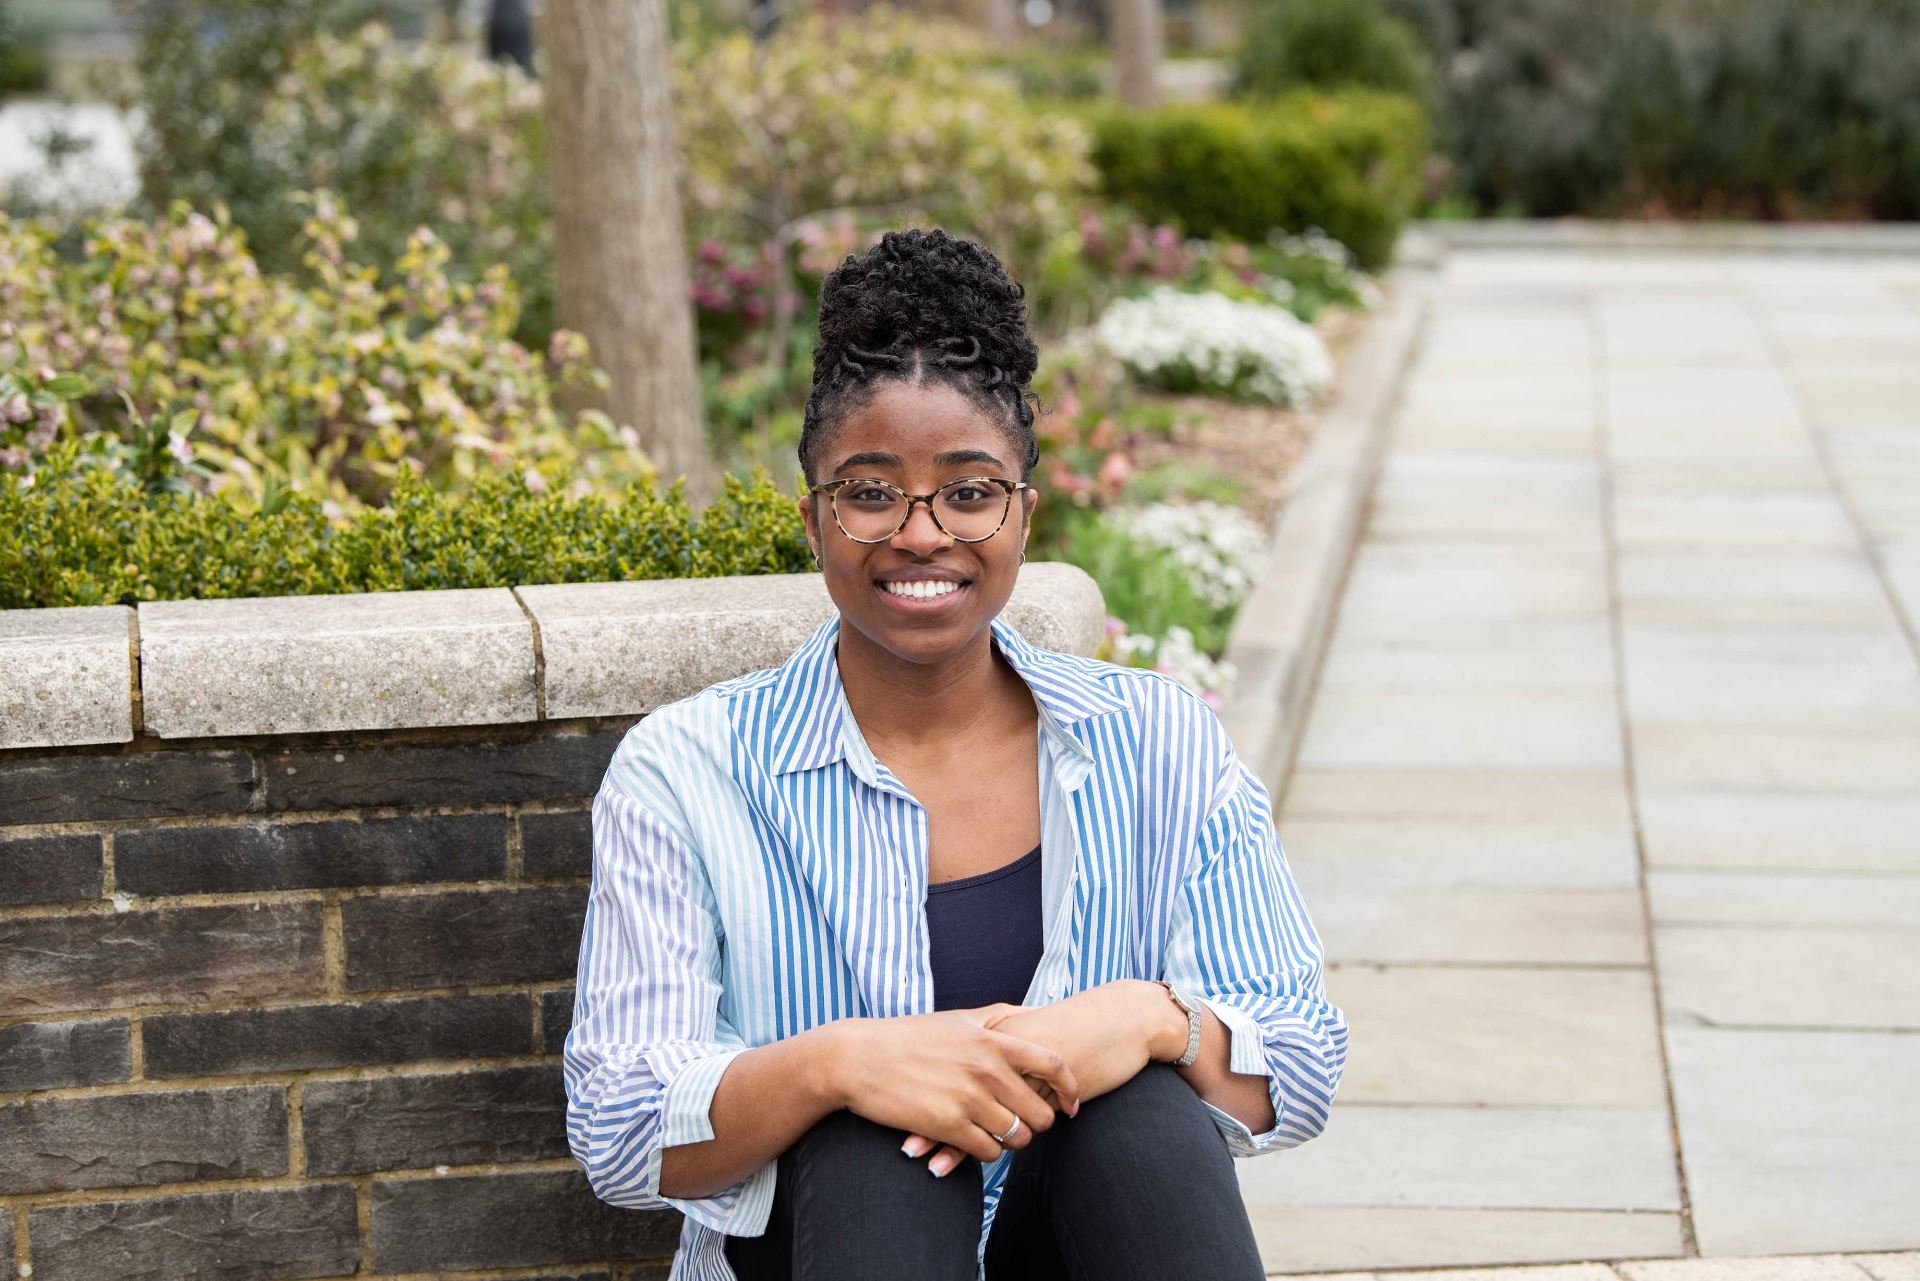 University of Bristol student Chinelo Etiaba wears professional attire as she smiles, sitting in a garden with a stone wall behind her.